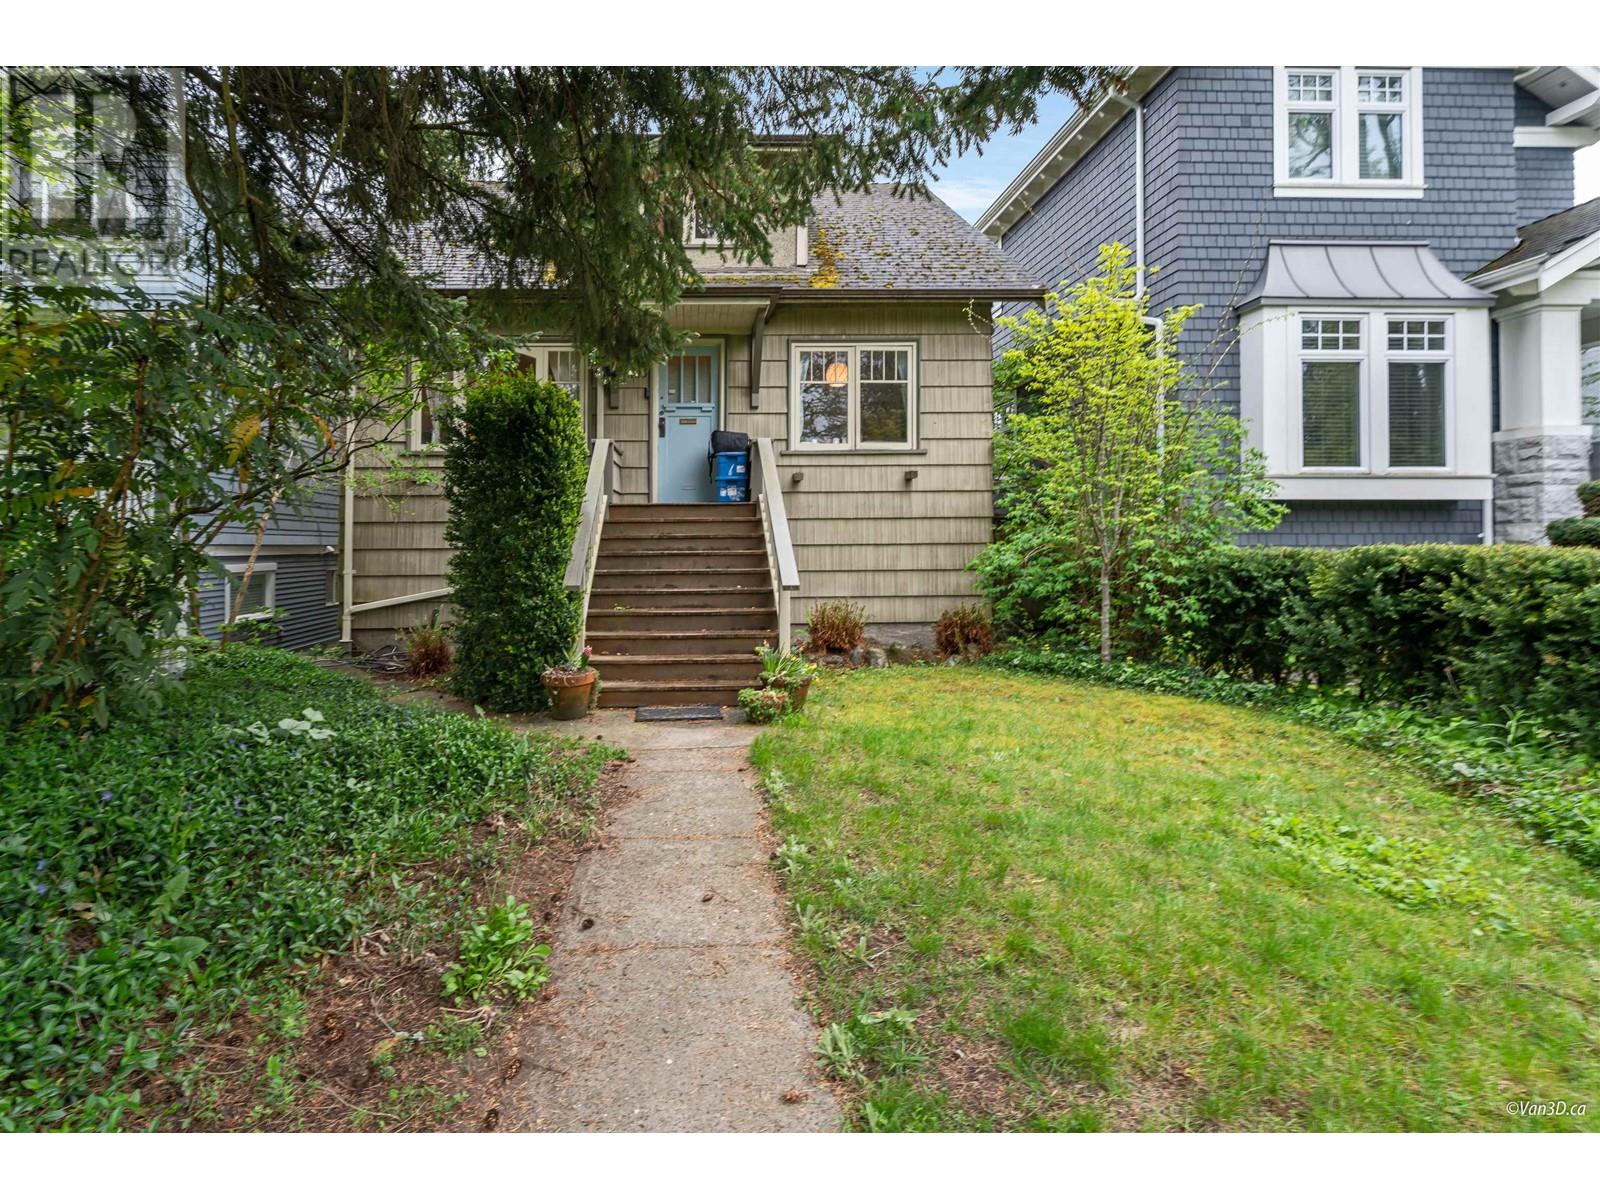 Listing Picture 5 of 31 : 3760 W 37TH AVENUE, Vancouver / 溫哥華 - 魯藝地產 Yvonne Lu Group - MLS Medallion Club Member